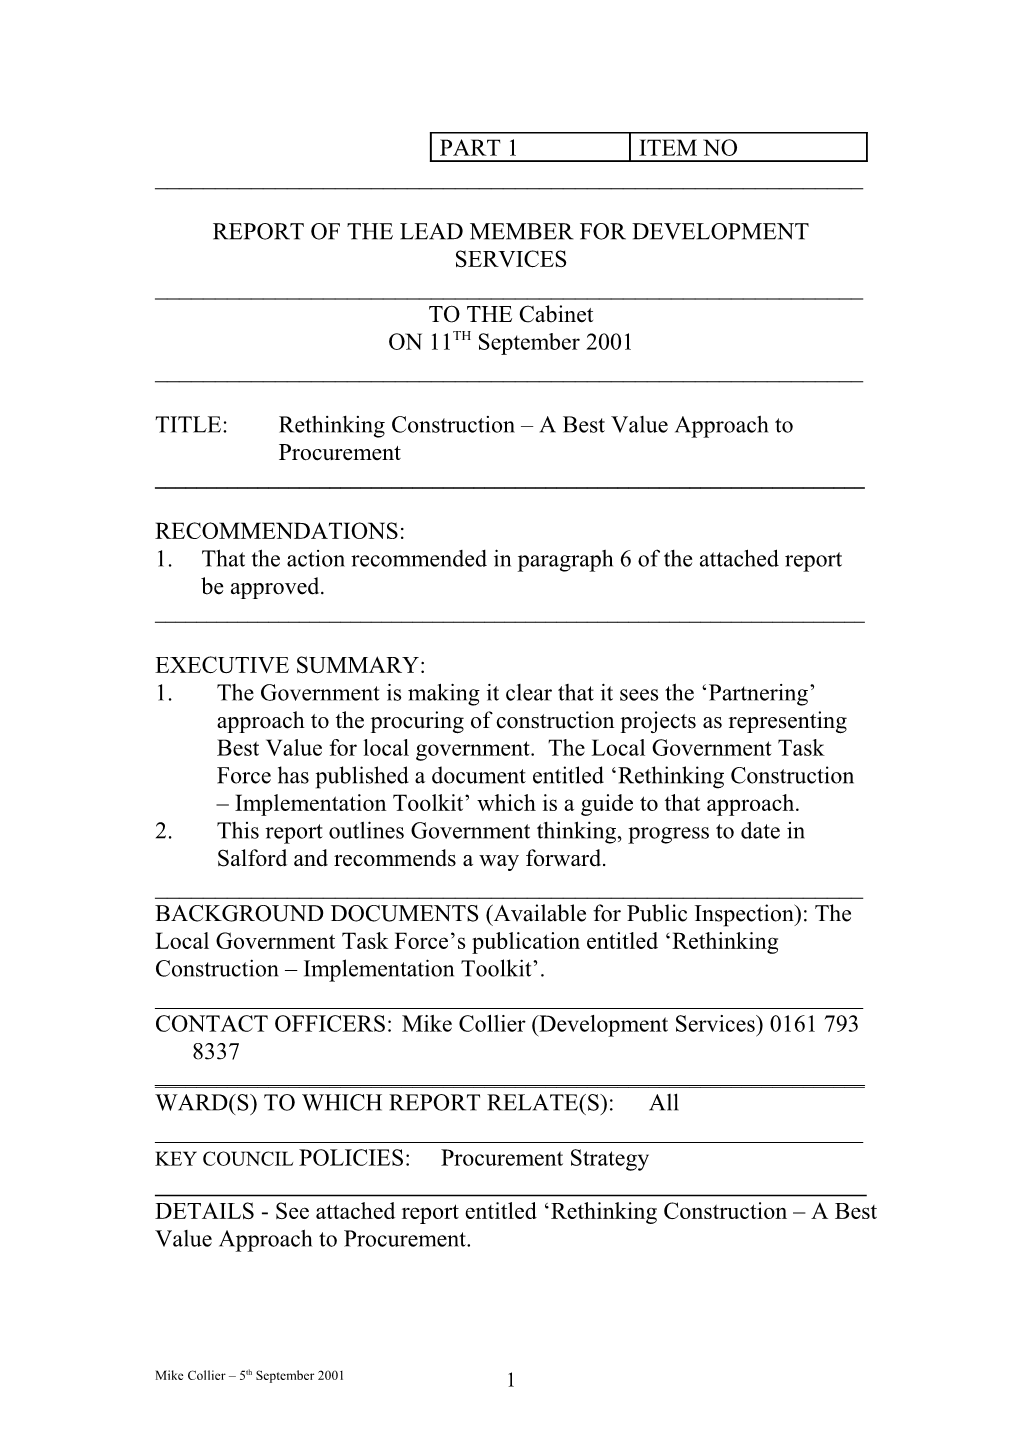 Report of the Director of Development Services to Directors Team On